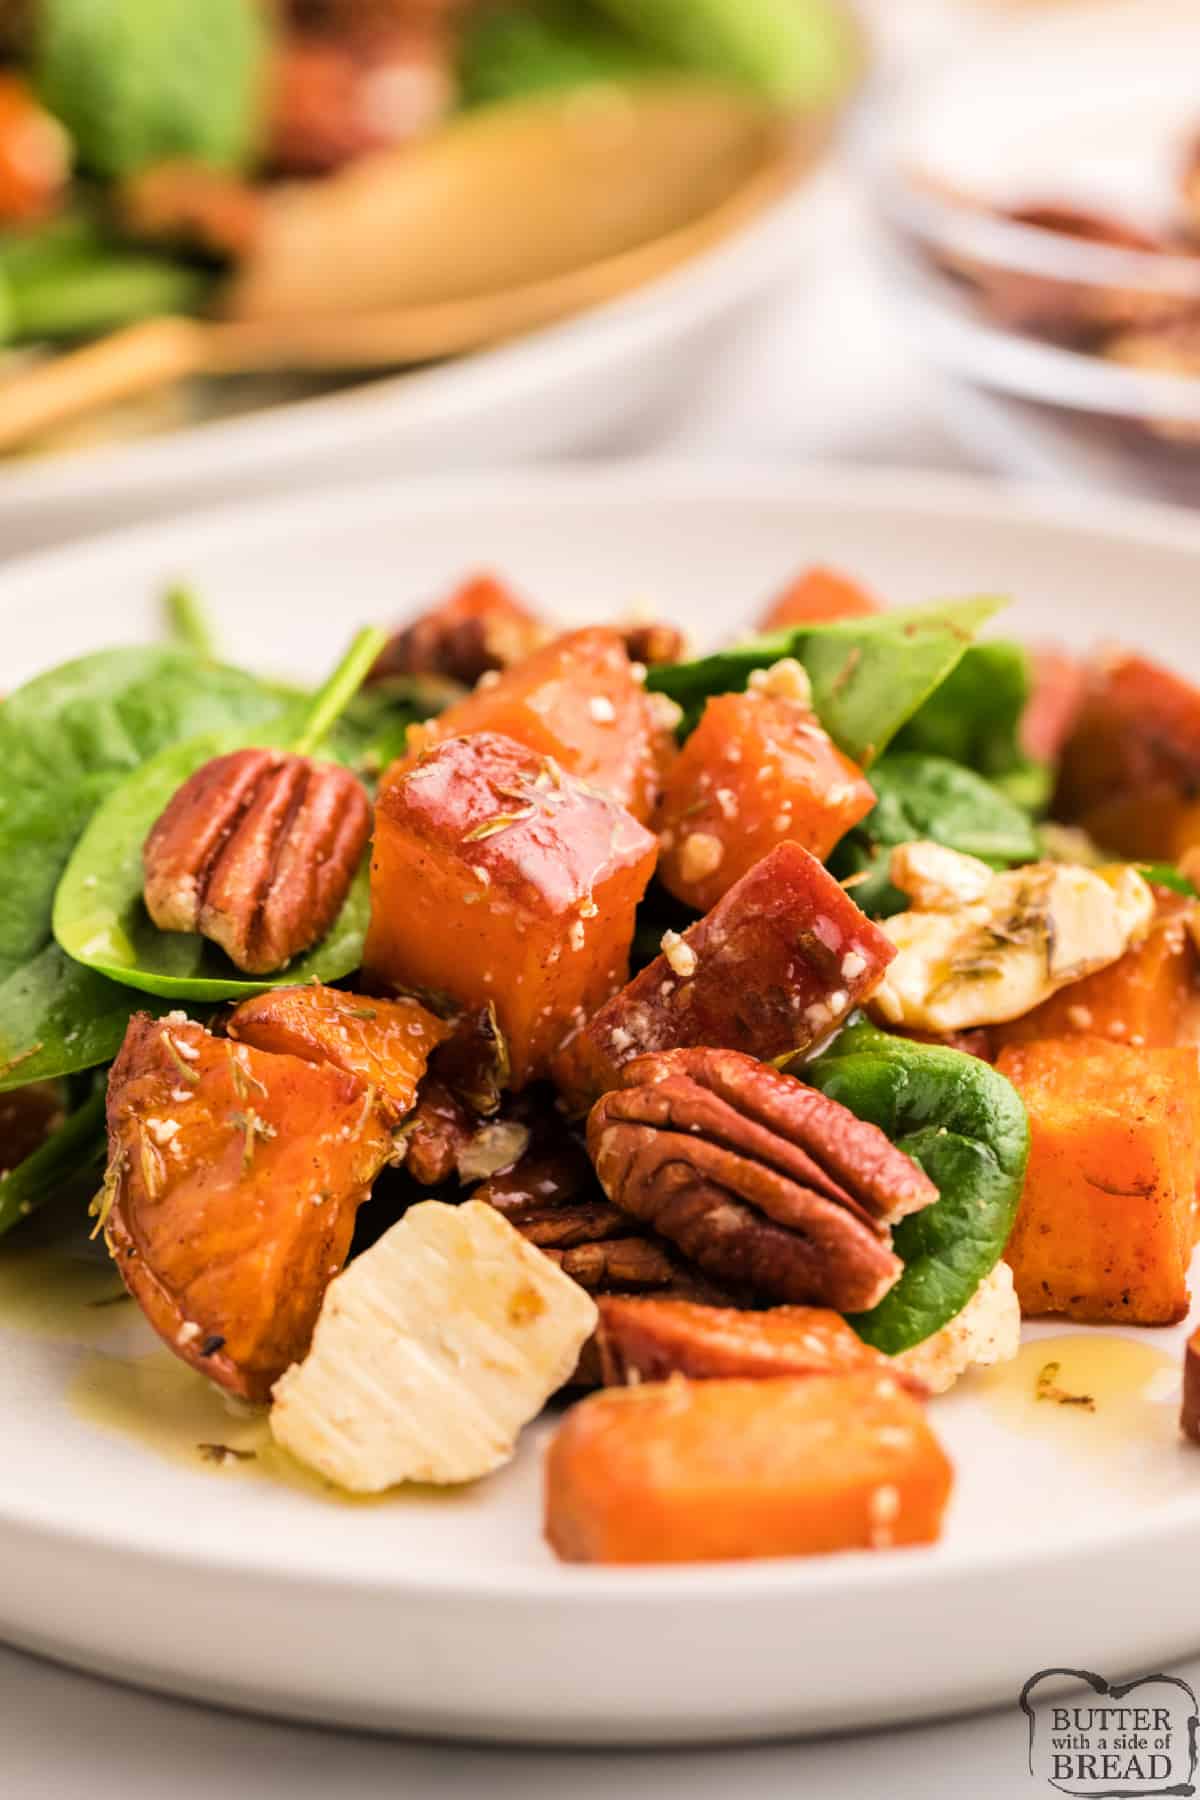 Spinach with sweet potatoes, feta and pecans. 